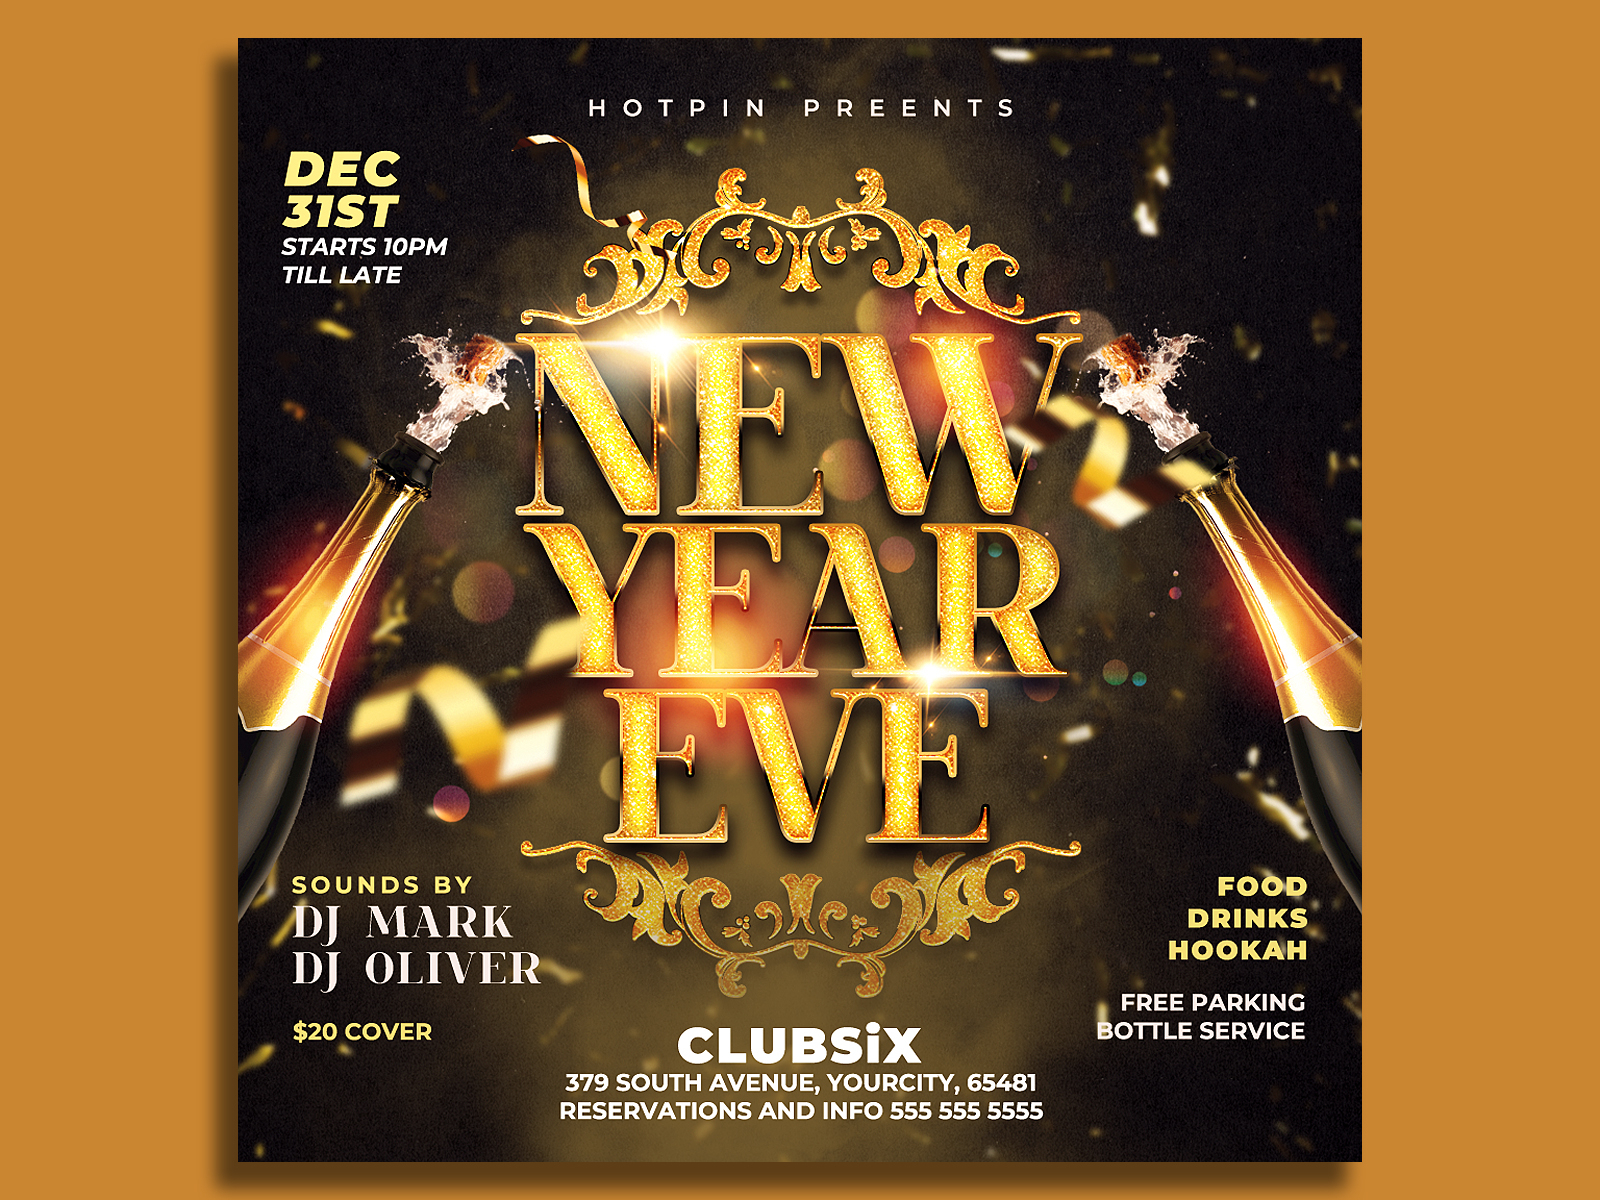 New Year Eve Flyer Template by Hotpin on Dribbble